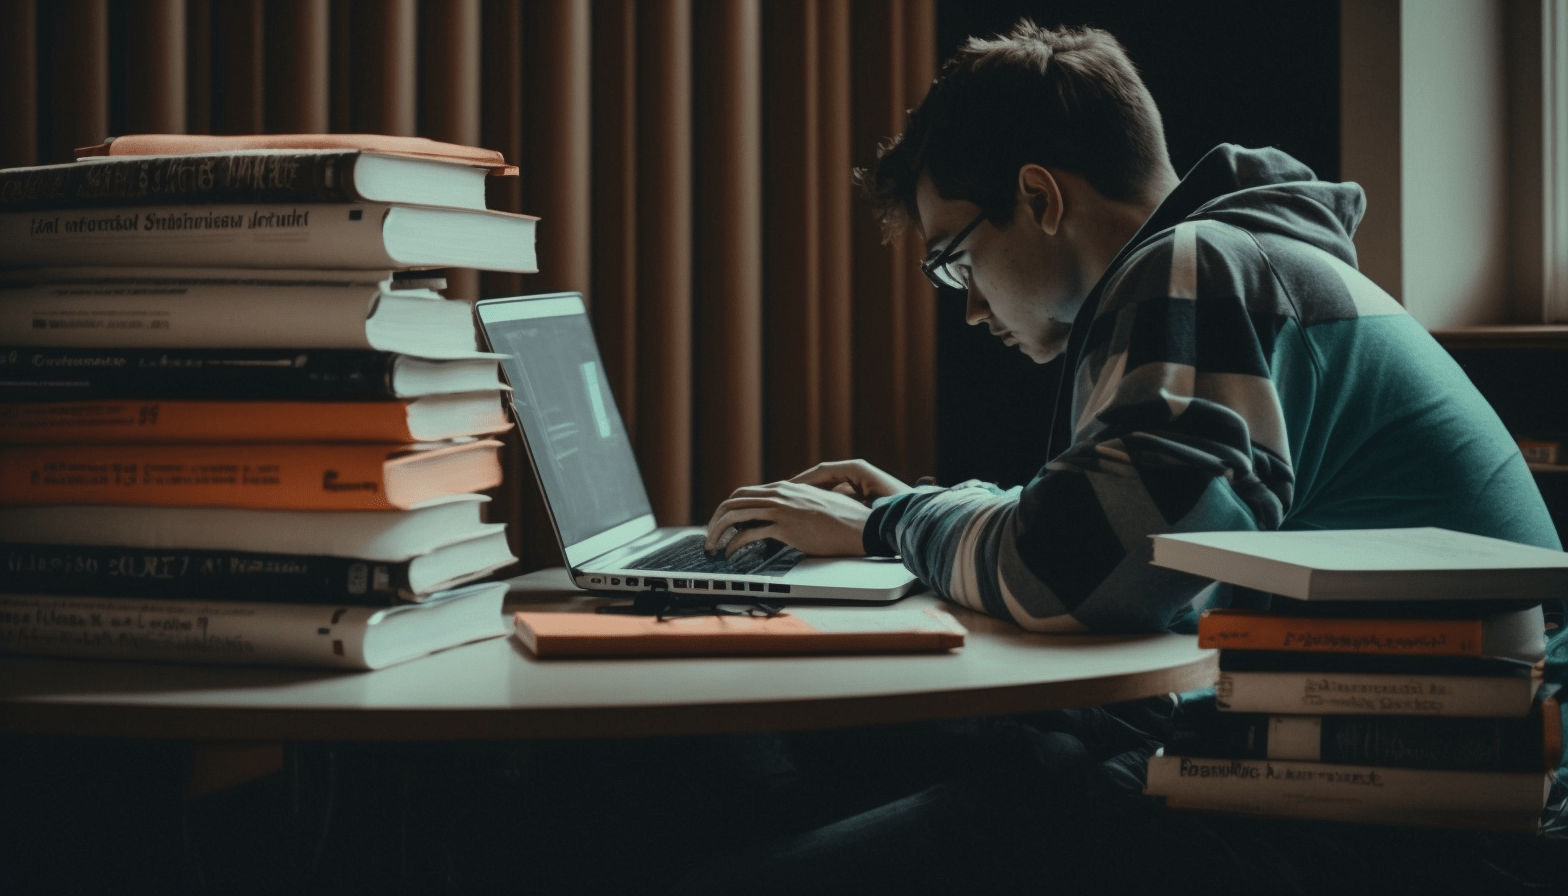 A person studying with a laptop and books in front of them, representing the preparation required to pass the CompTIA Security+ Certification Exam.